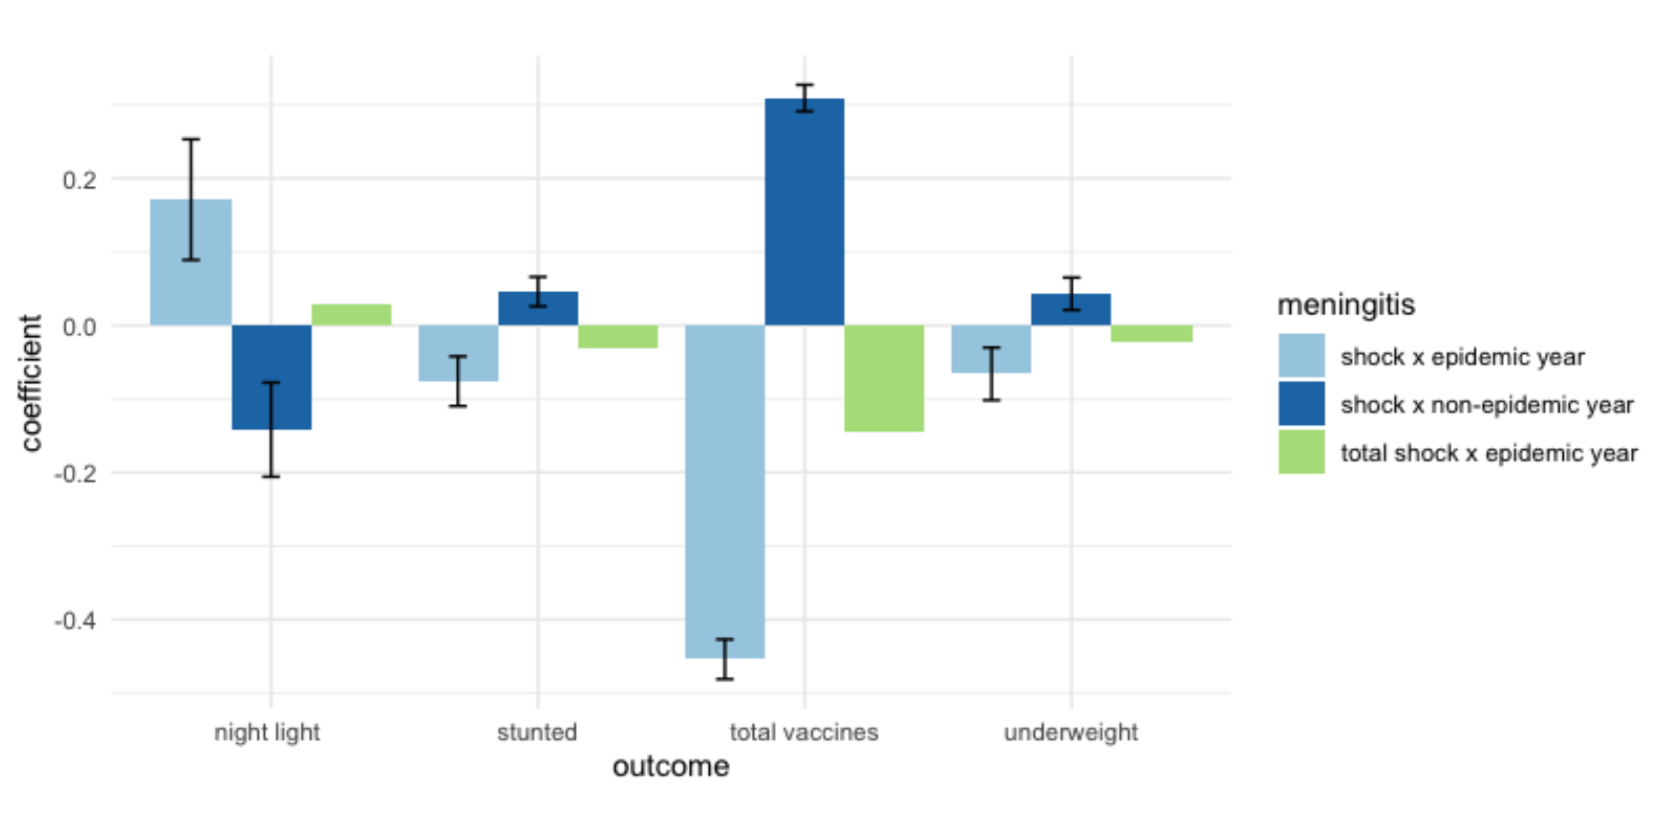 More economic activity, Less stunting and underweight children currently, if born in high meningitis shock districts but year was declared an epidemic year. In high shock, non epidemic year districts, lowered economic activity, and more stunting and underweight. Potential crowd-out of routine vaccines during epidemic years